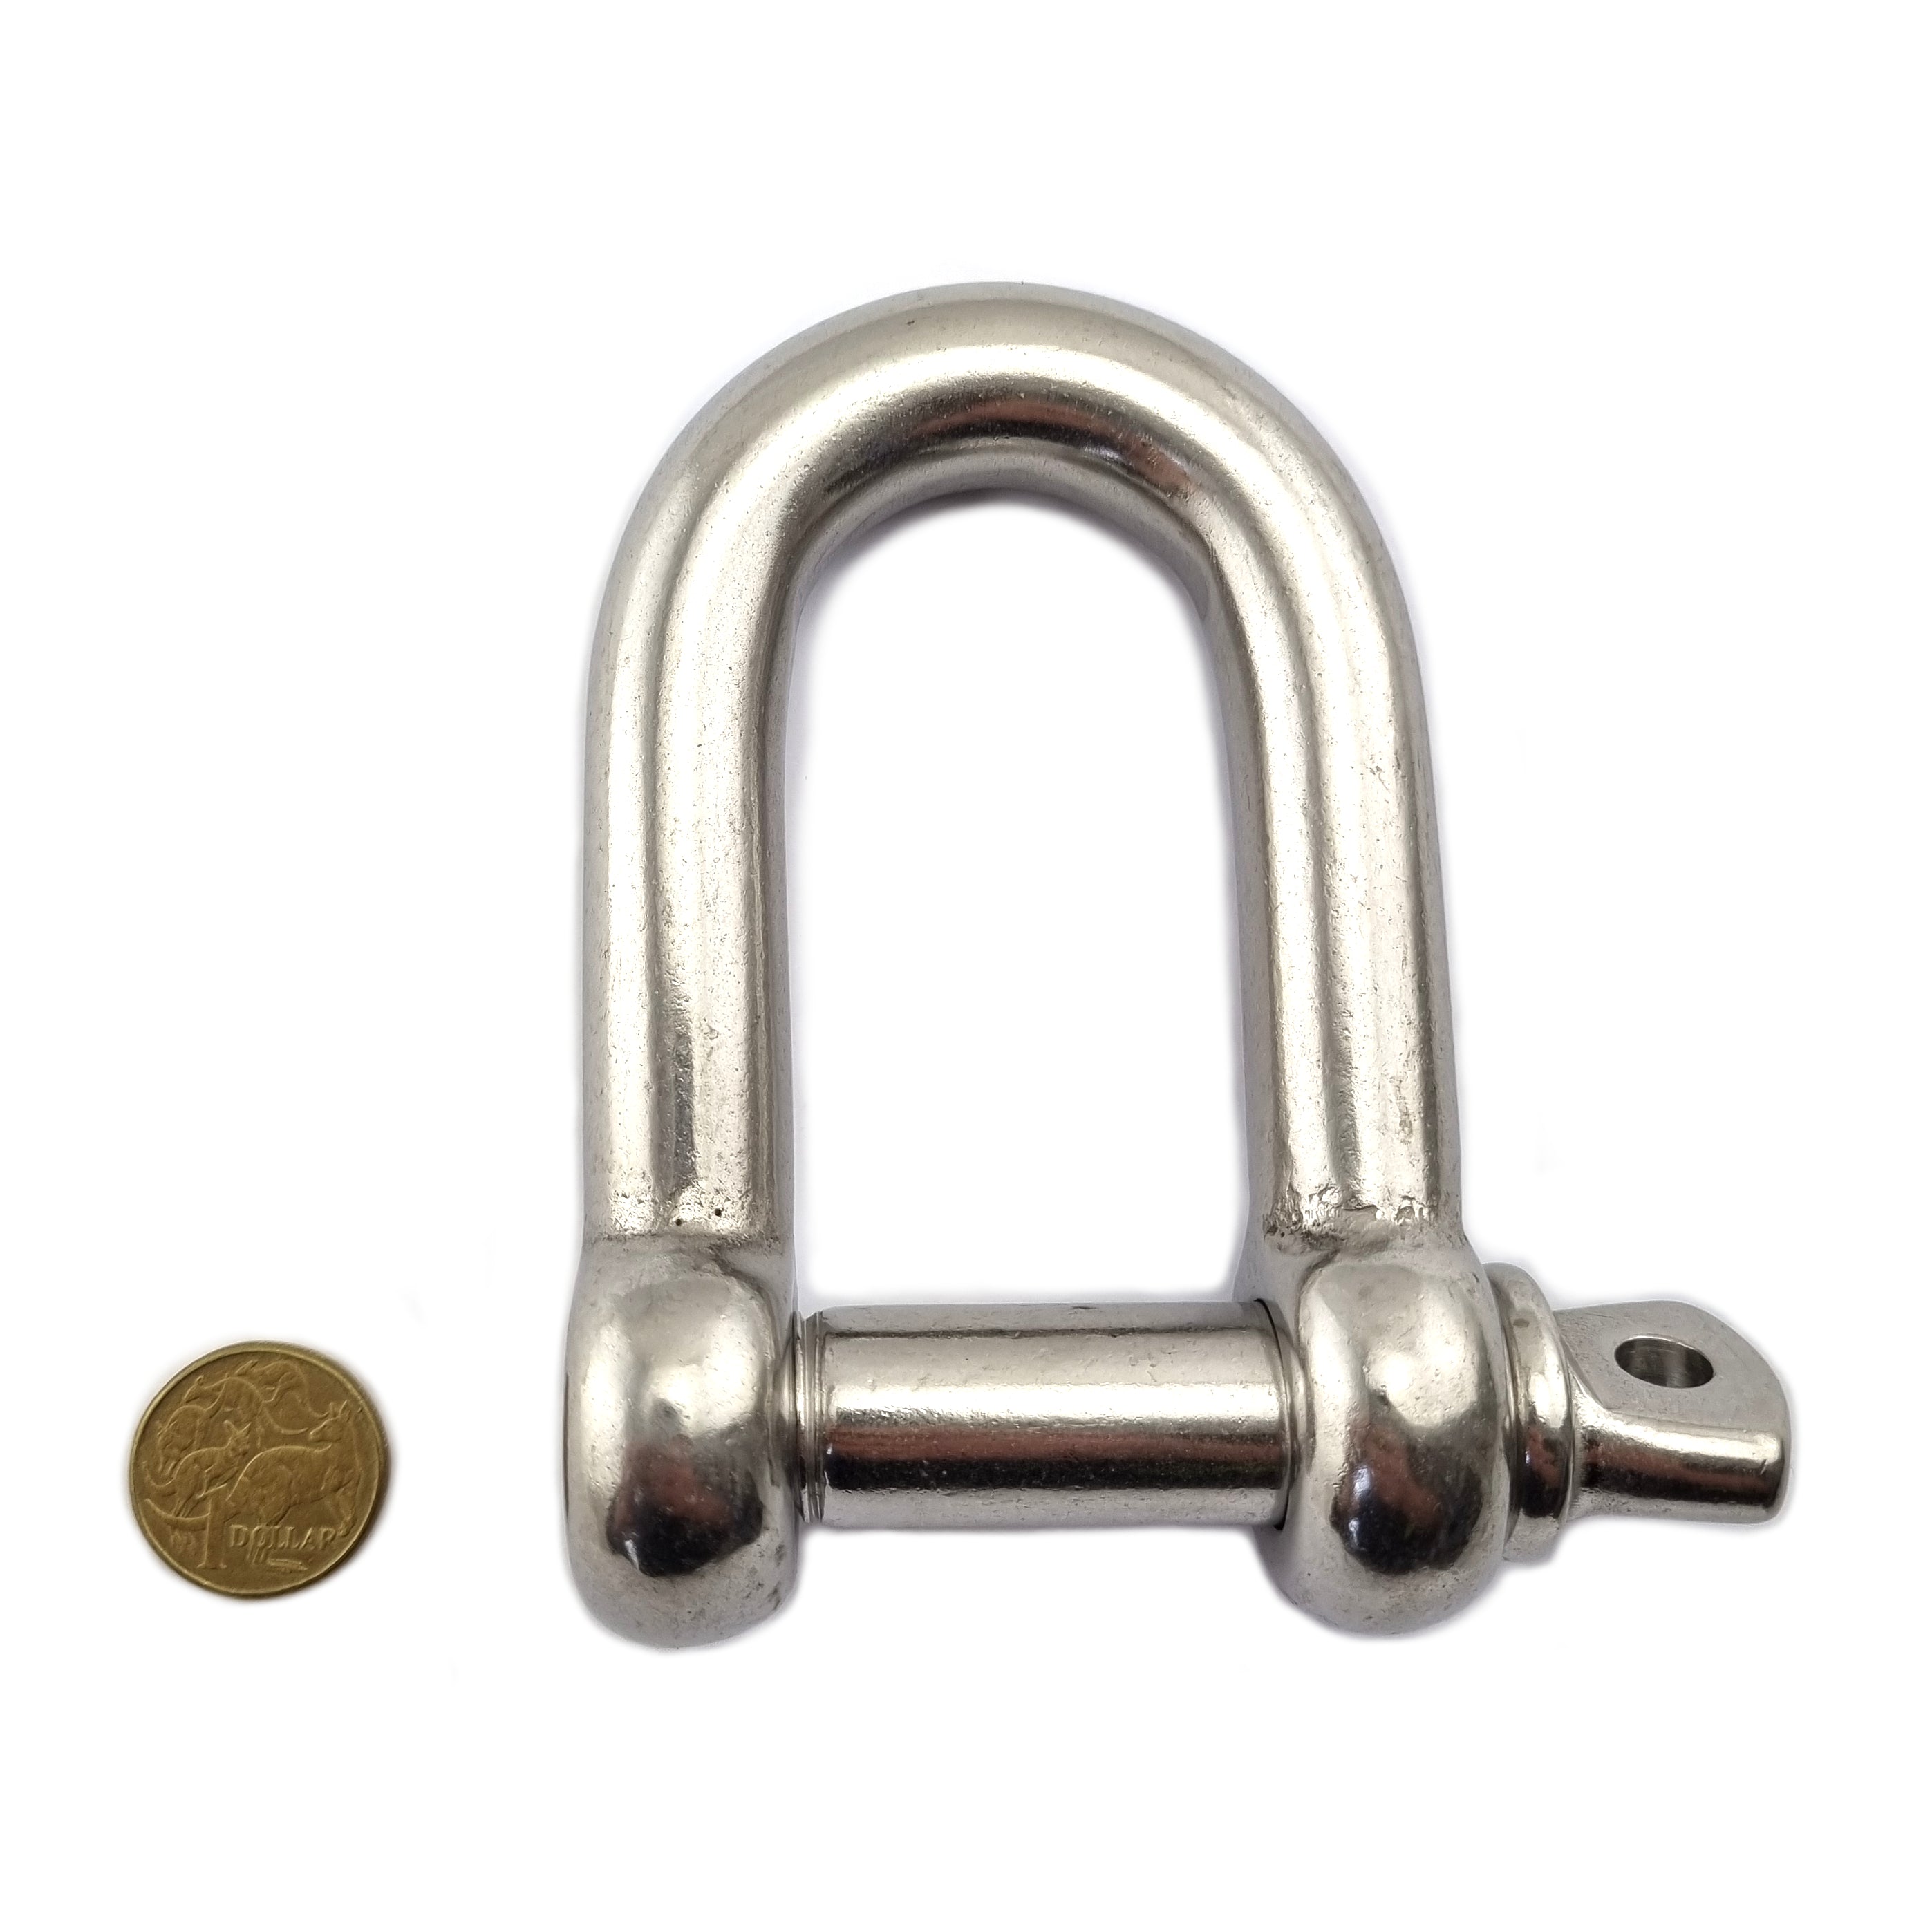 20mm D Shackle in type 316 marine-grade stainless steel. Shop chain.com.au